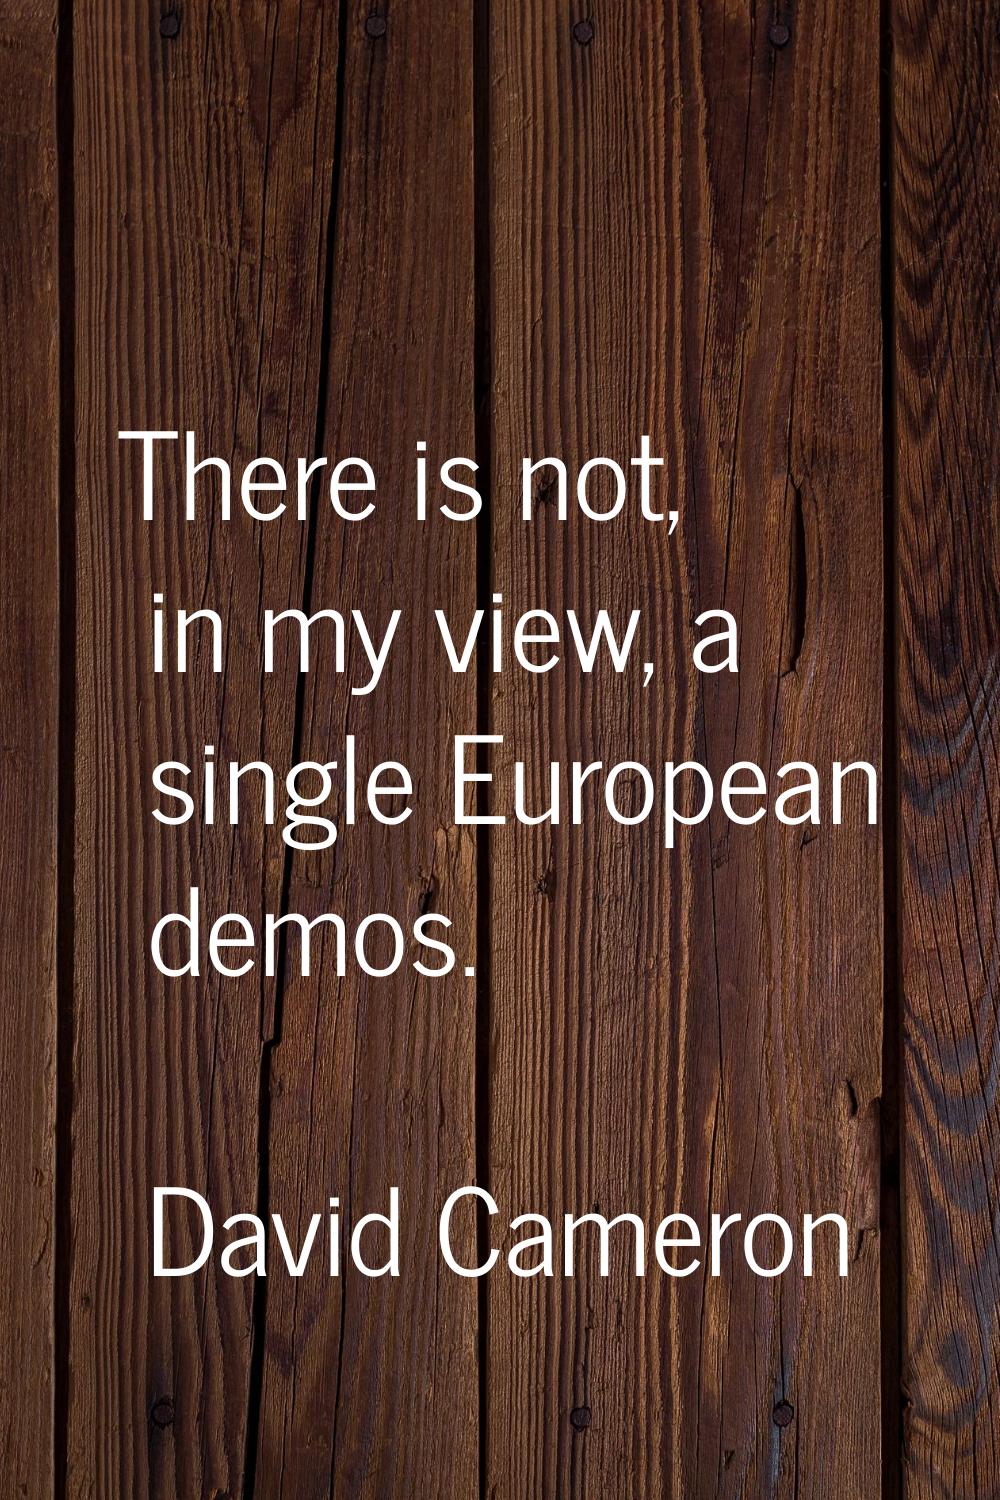 There is not, in my view, a single European demos.